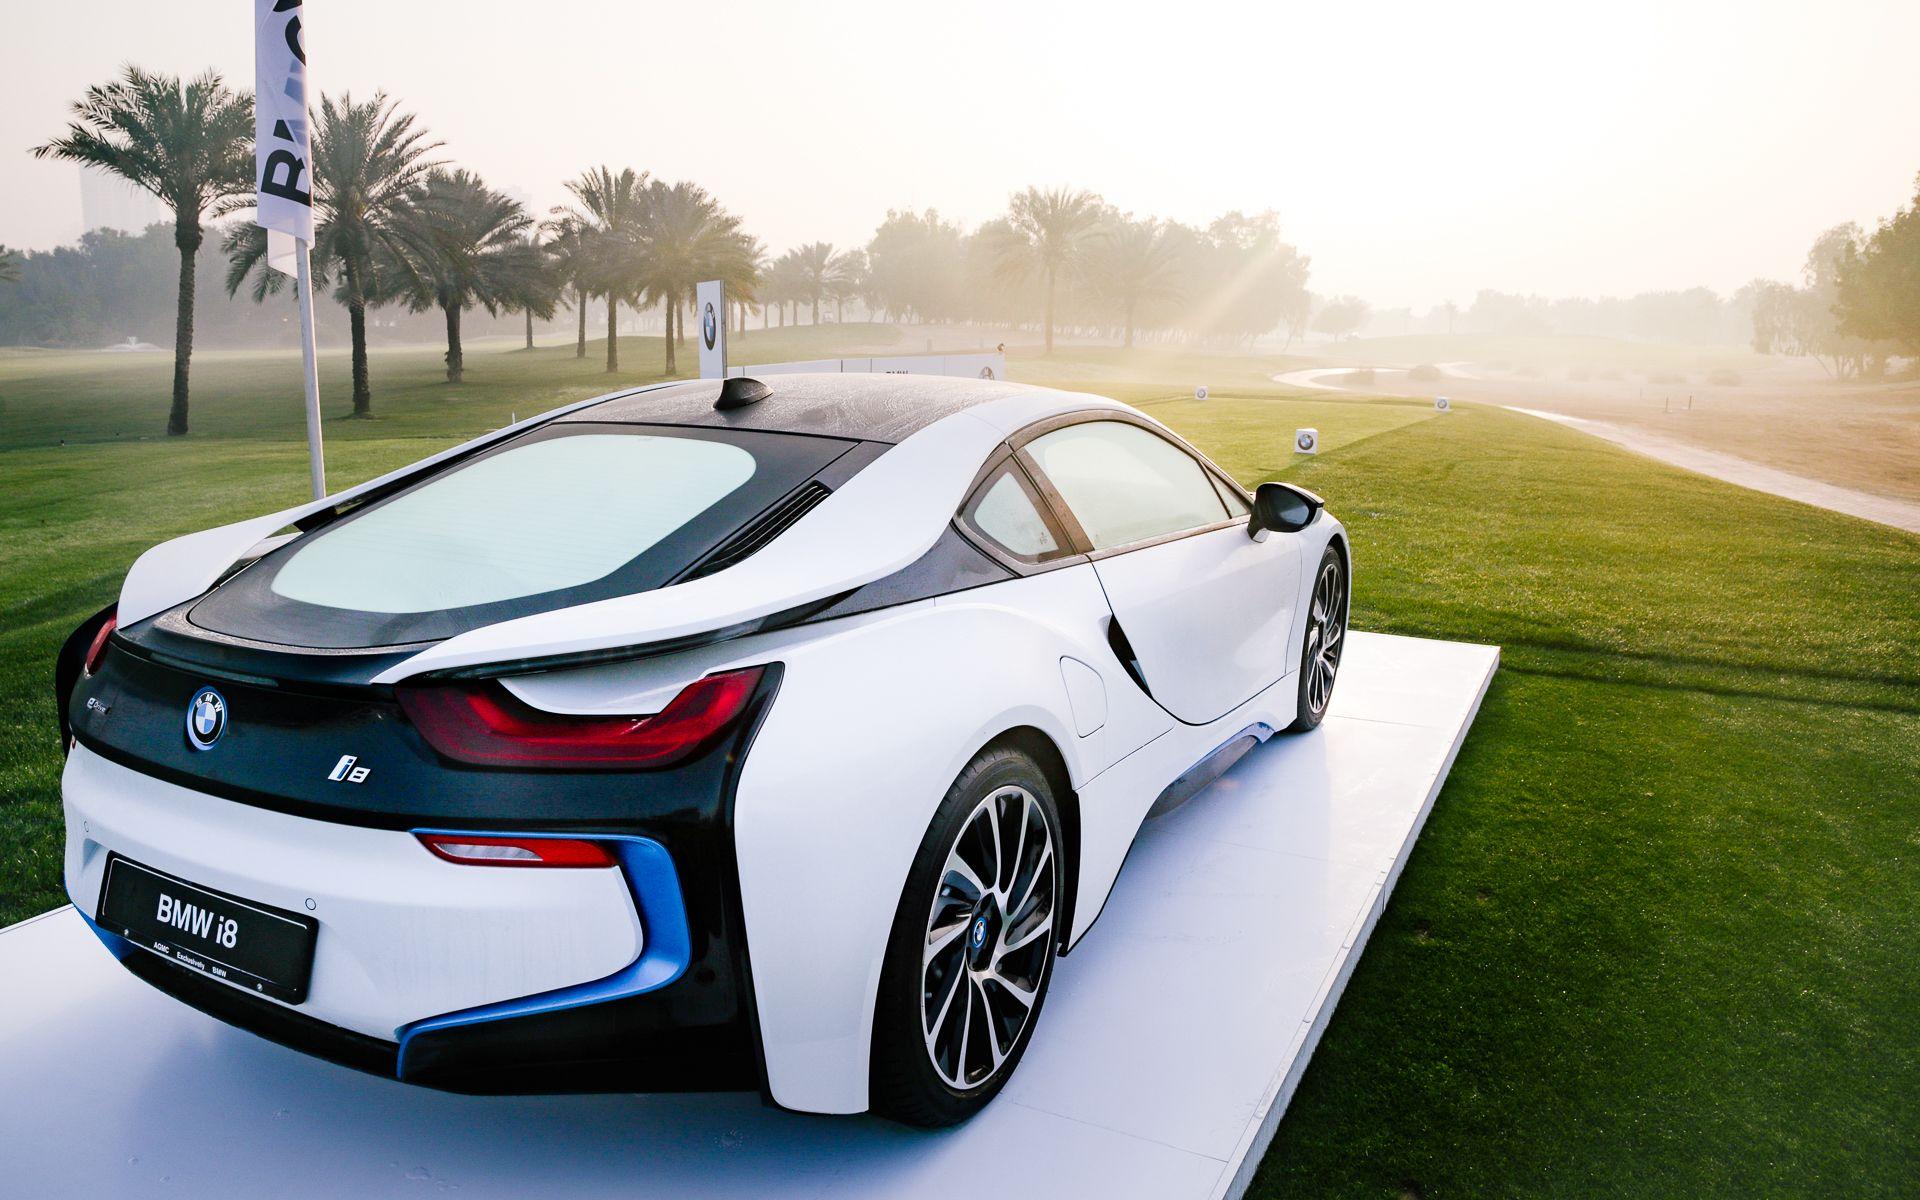 The First Ever BMW i8 Roadster: Video Teaser